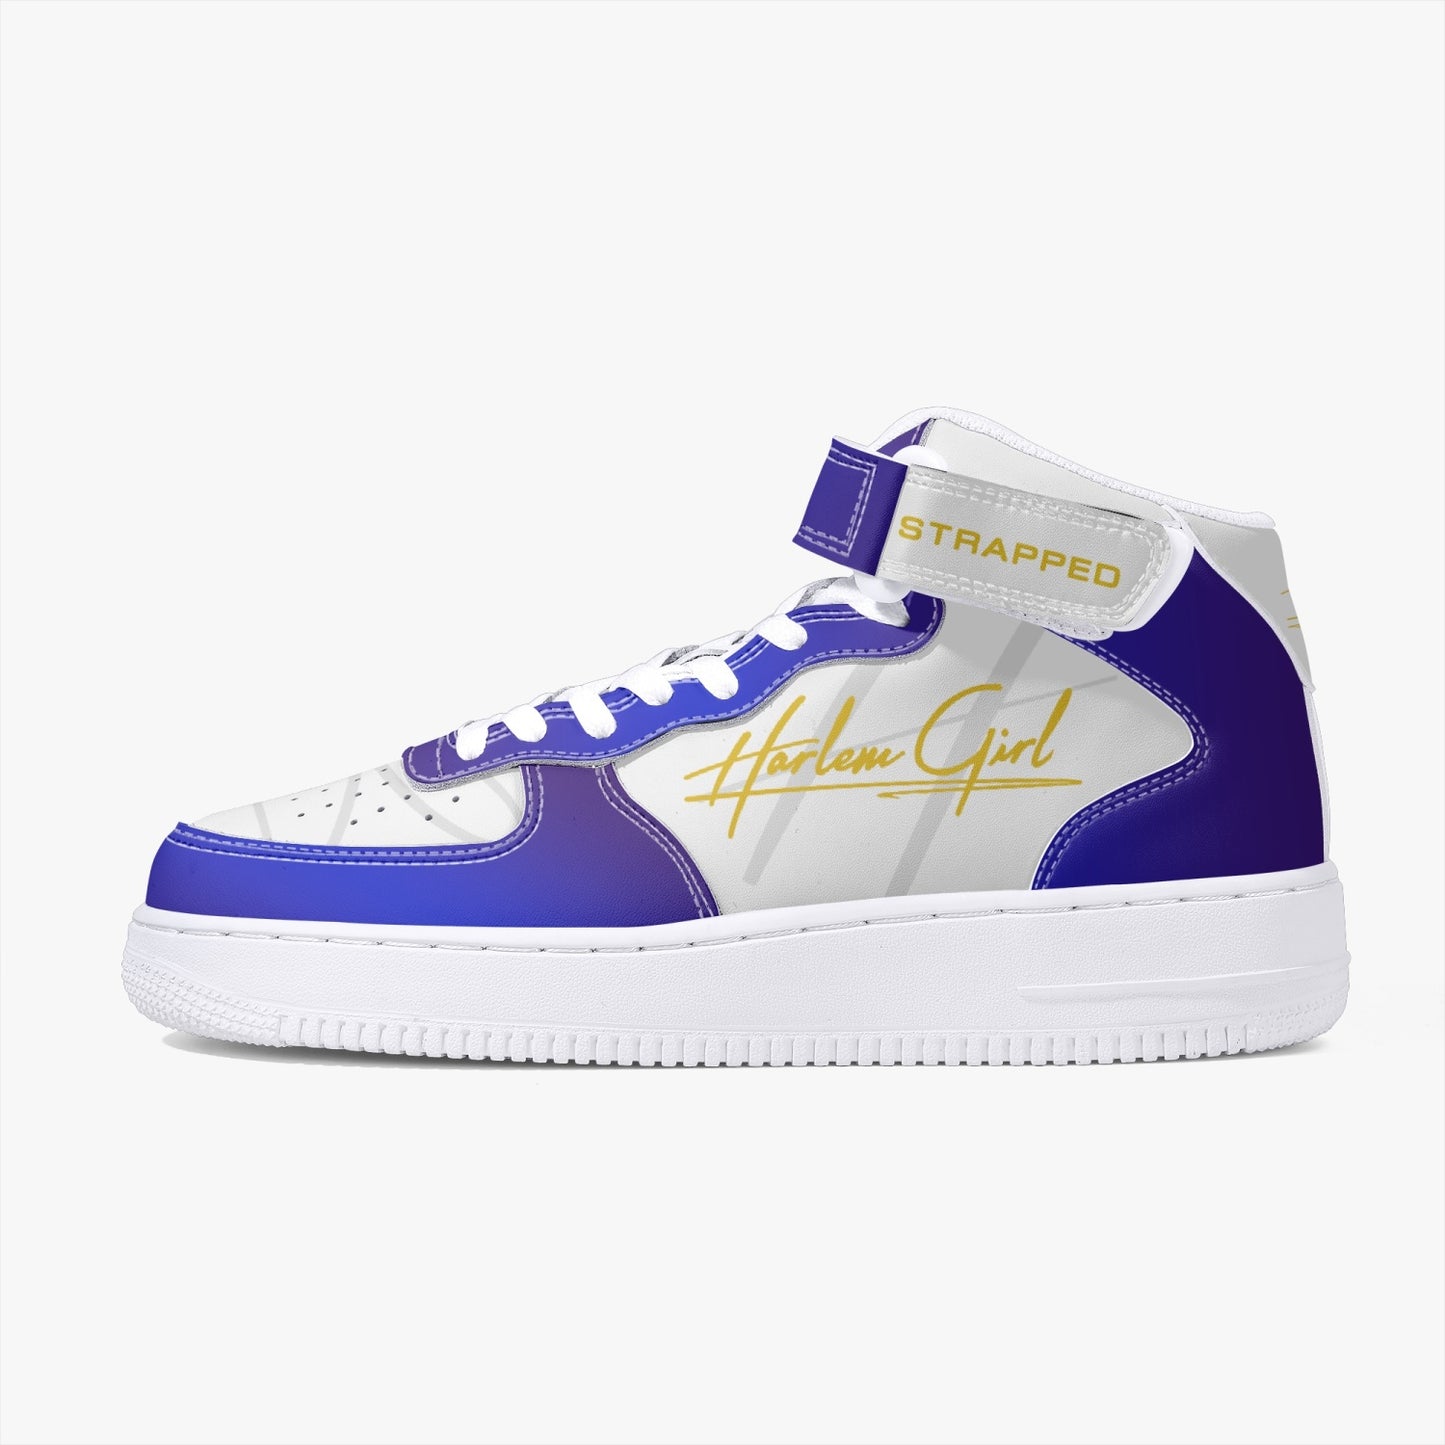 HB Harlem Girl "Strapped" Women's Leather Hi Top Kicks - Blue & Gold-Top Leather Sports Sneakers